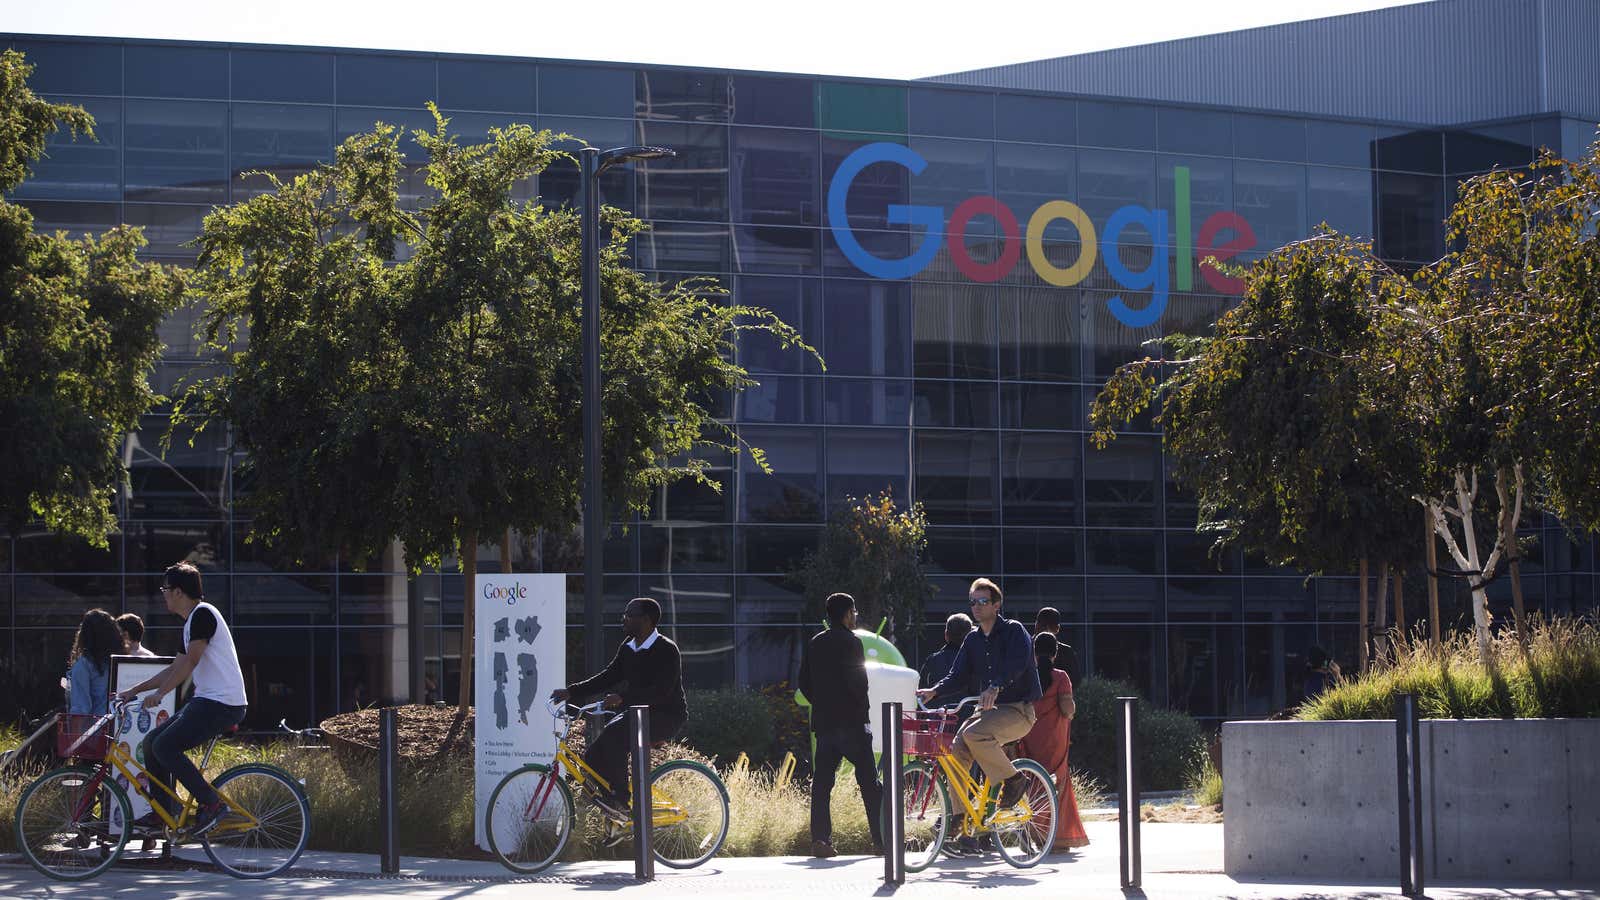 Google’s headquarters in Mountain View, California. Google, like other US tech companies, heavily utilizes the H-1B visa program to source skilled talent from overseas.